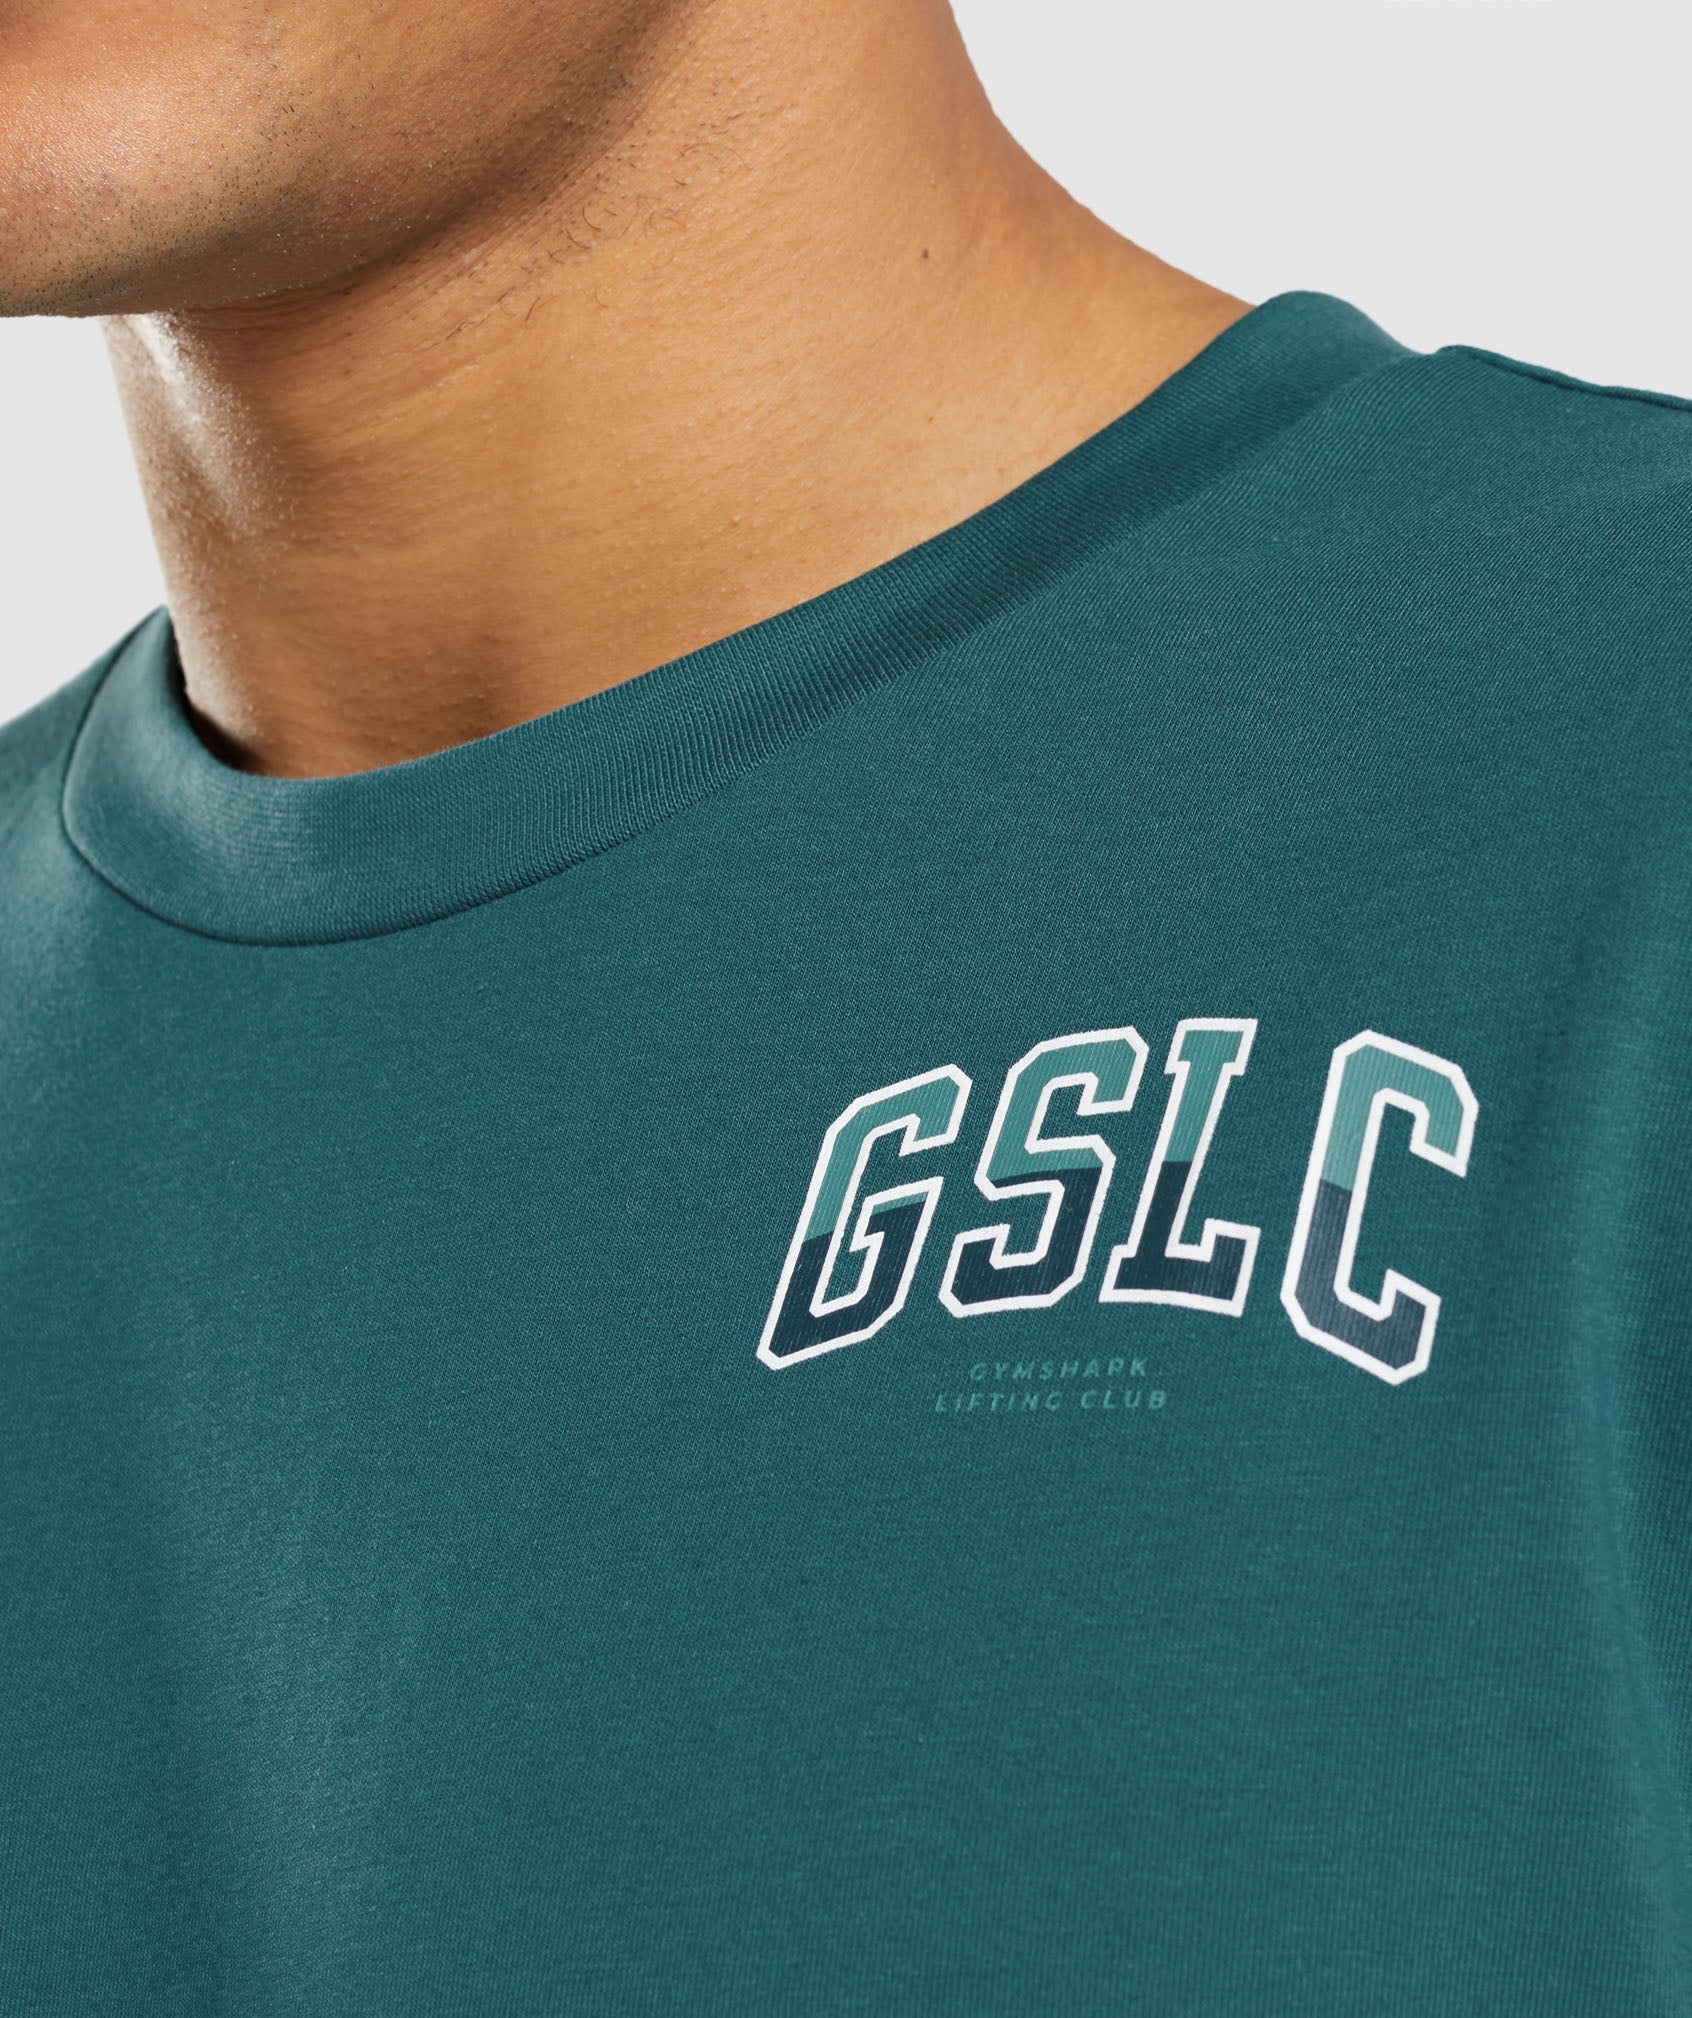 GSLC Oversized T-Shirt in Teal - view 6